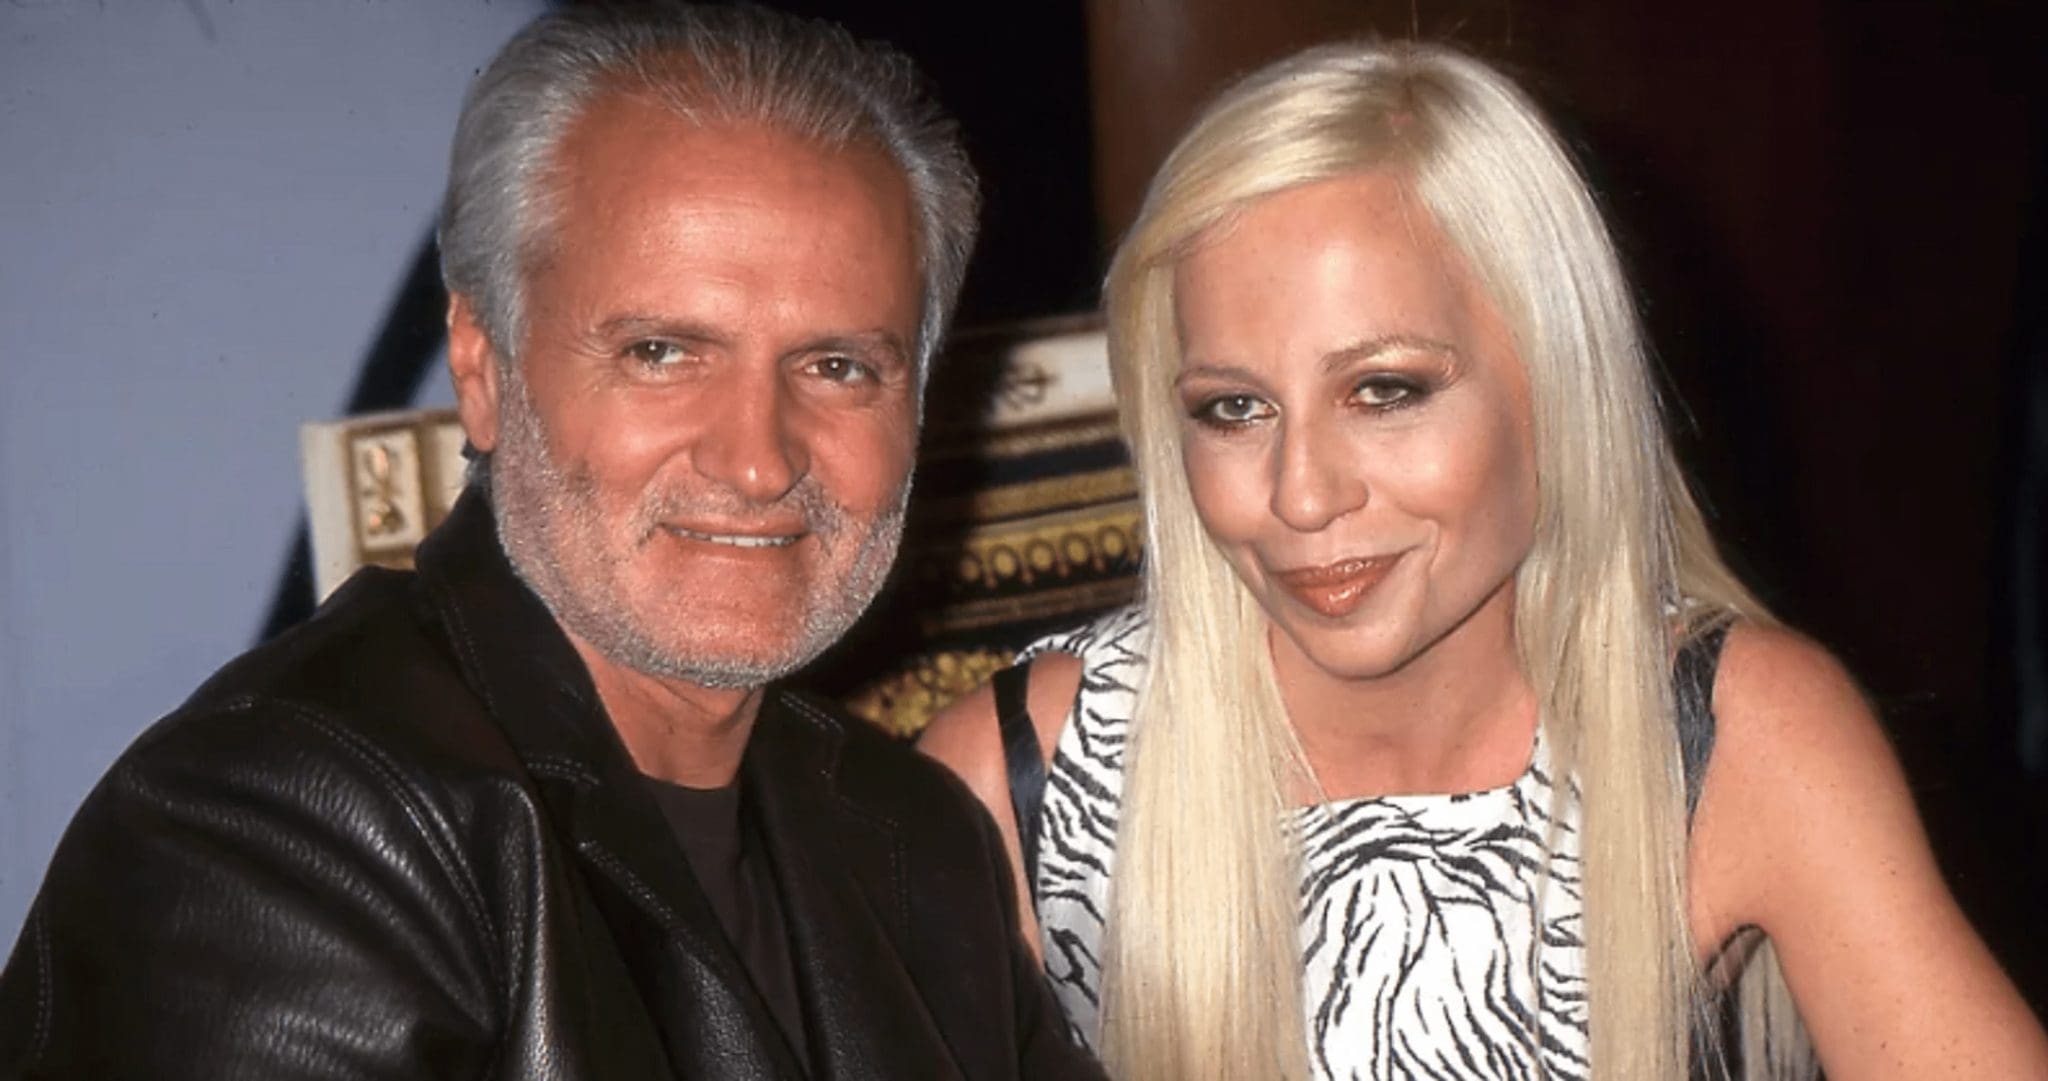 The 25th Anniversary Of Her Brother Gianni Versace's Murder, Fashion Designer Donatella Versace Posted A Tribute On Instagram